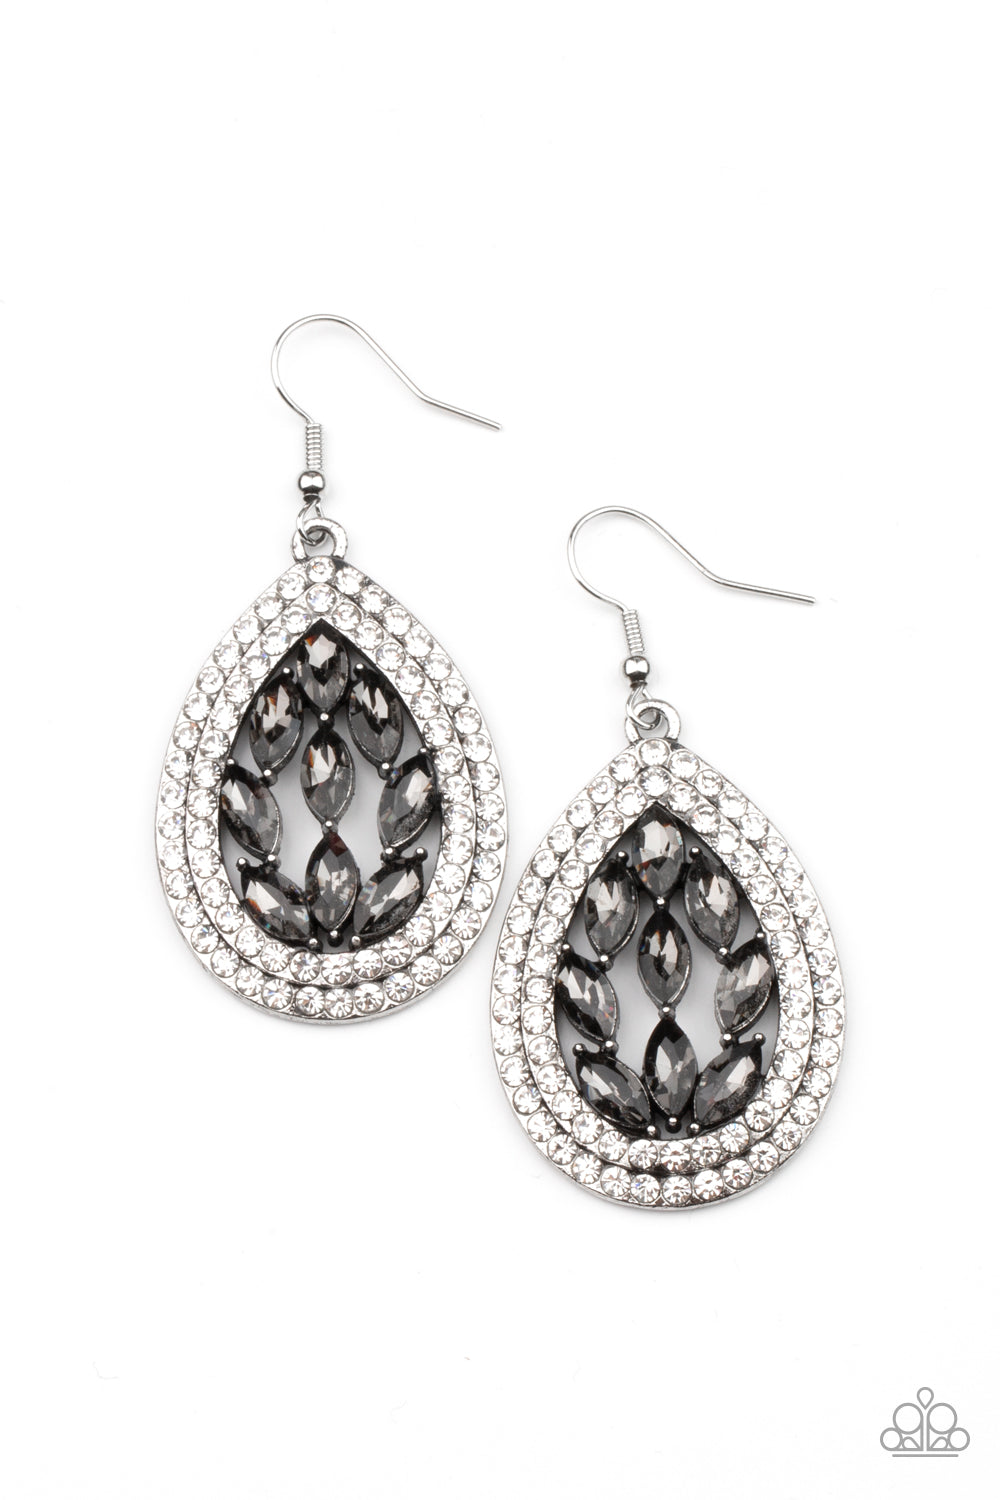 Encased Elegance Silver Earring - Paparazzi Accessories  Smoky marquise cut rhinestones collect inside two borders of glassy white rhinestones, coalescing into a sparkly teardrop. Earring attaches to a standard fishhook fitting.  All Paparazzi Accessories are lead free and nickel free!  Sold as one pair of earrings.